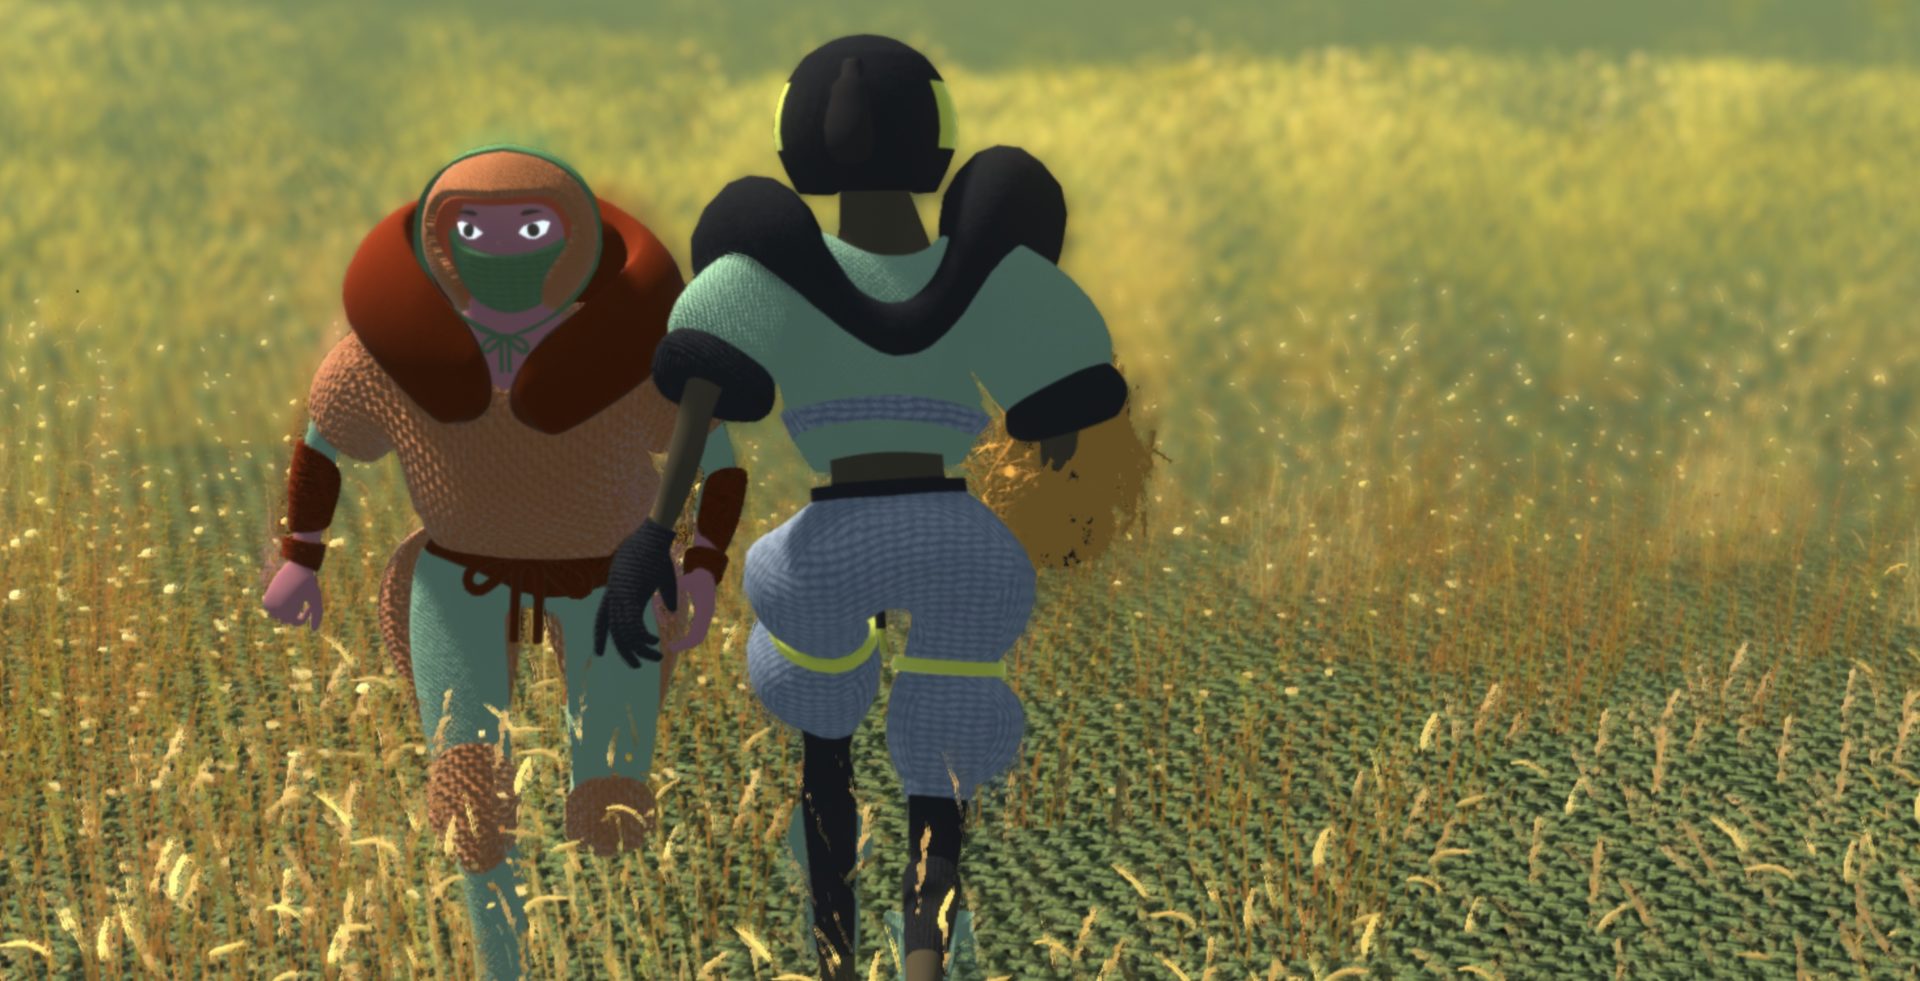 Two digital avatars on a digital grassy field. The figures are wearing American football outfits. Both the outfits and the grassy field look like they were crocheted.